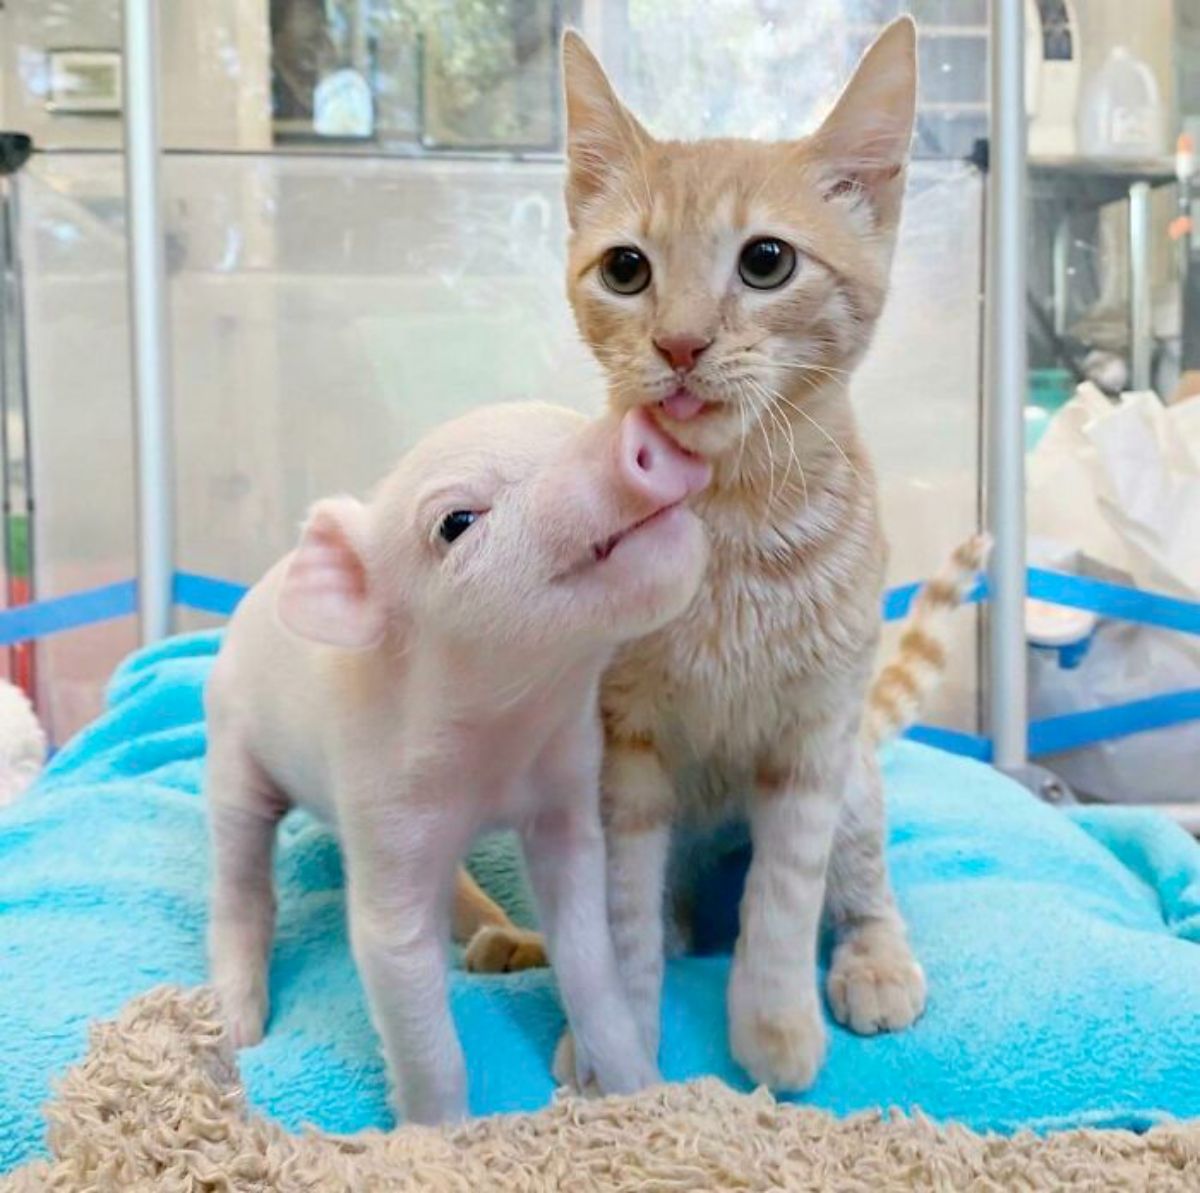 pink piglet nuzzling an orange kitten with its tongue sticking out slightly on a blue blanket